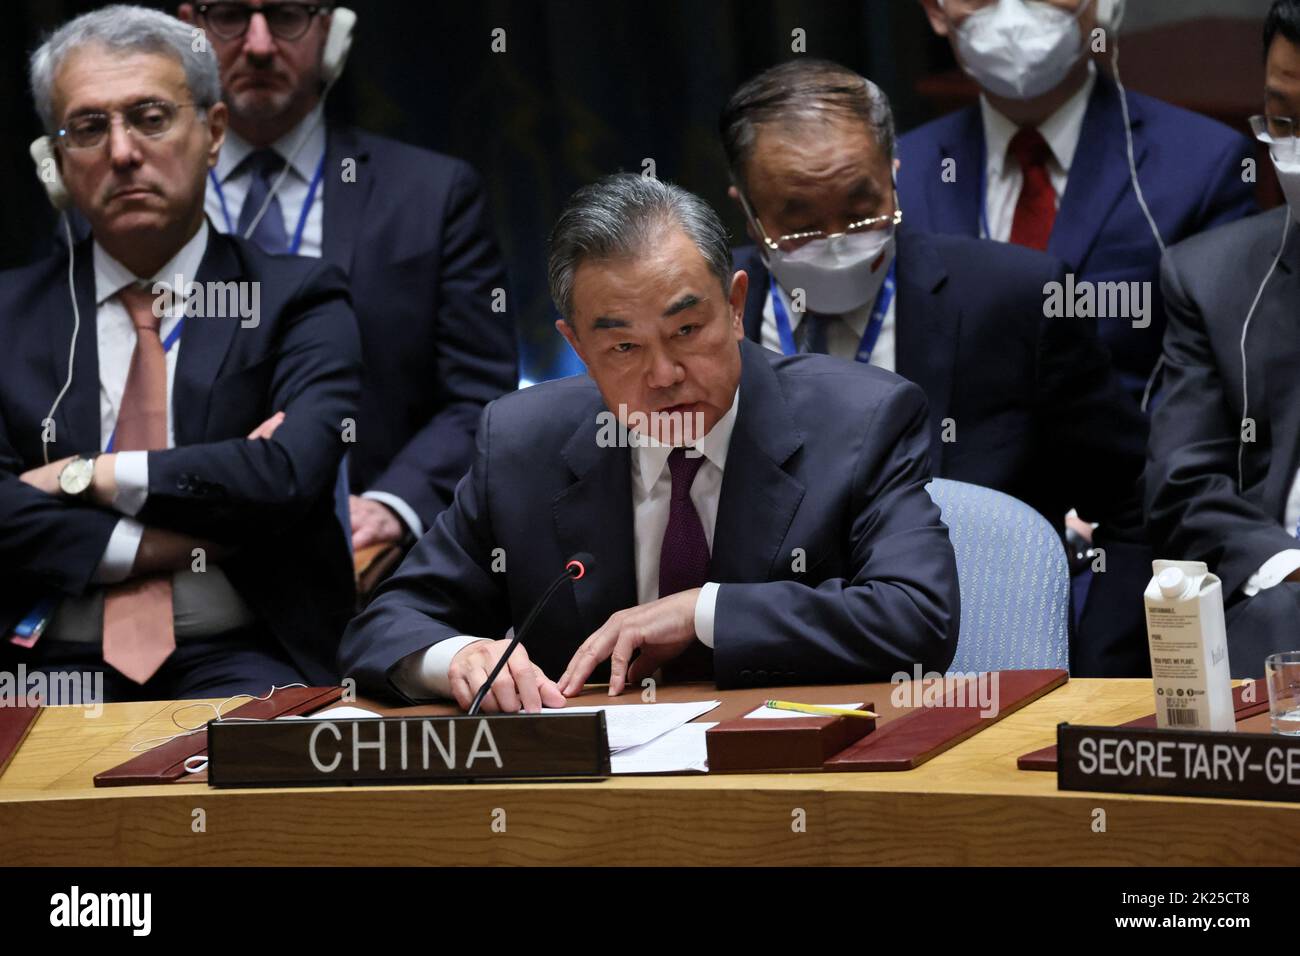 China's Foreign Minister Wang Yi speaks during a high level meeting of the United Nations Security Council on the situation amid Russia's invasion of Ukraine, at the 77th Session of the United Nations General Assembly at U.N. Headquarters in New York City, U.S., September 22, 2022. REUTERS/Brendan McDermid Stock Photo